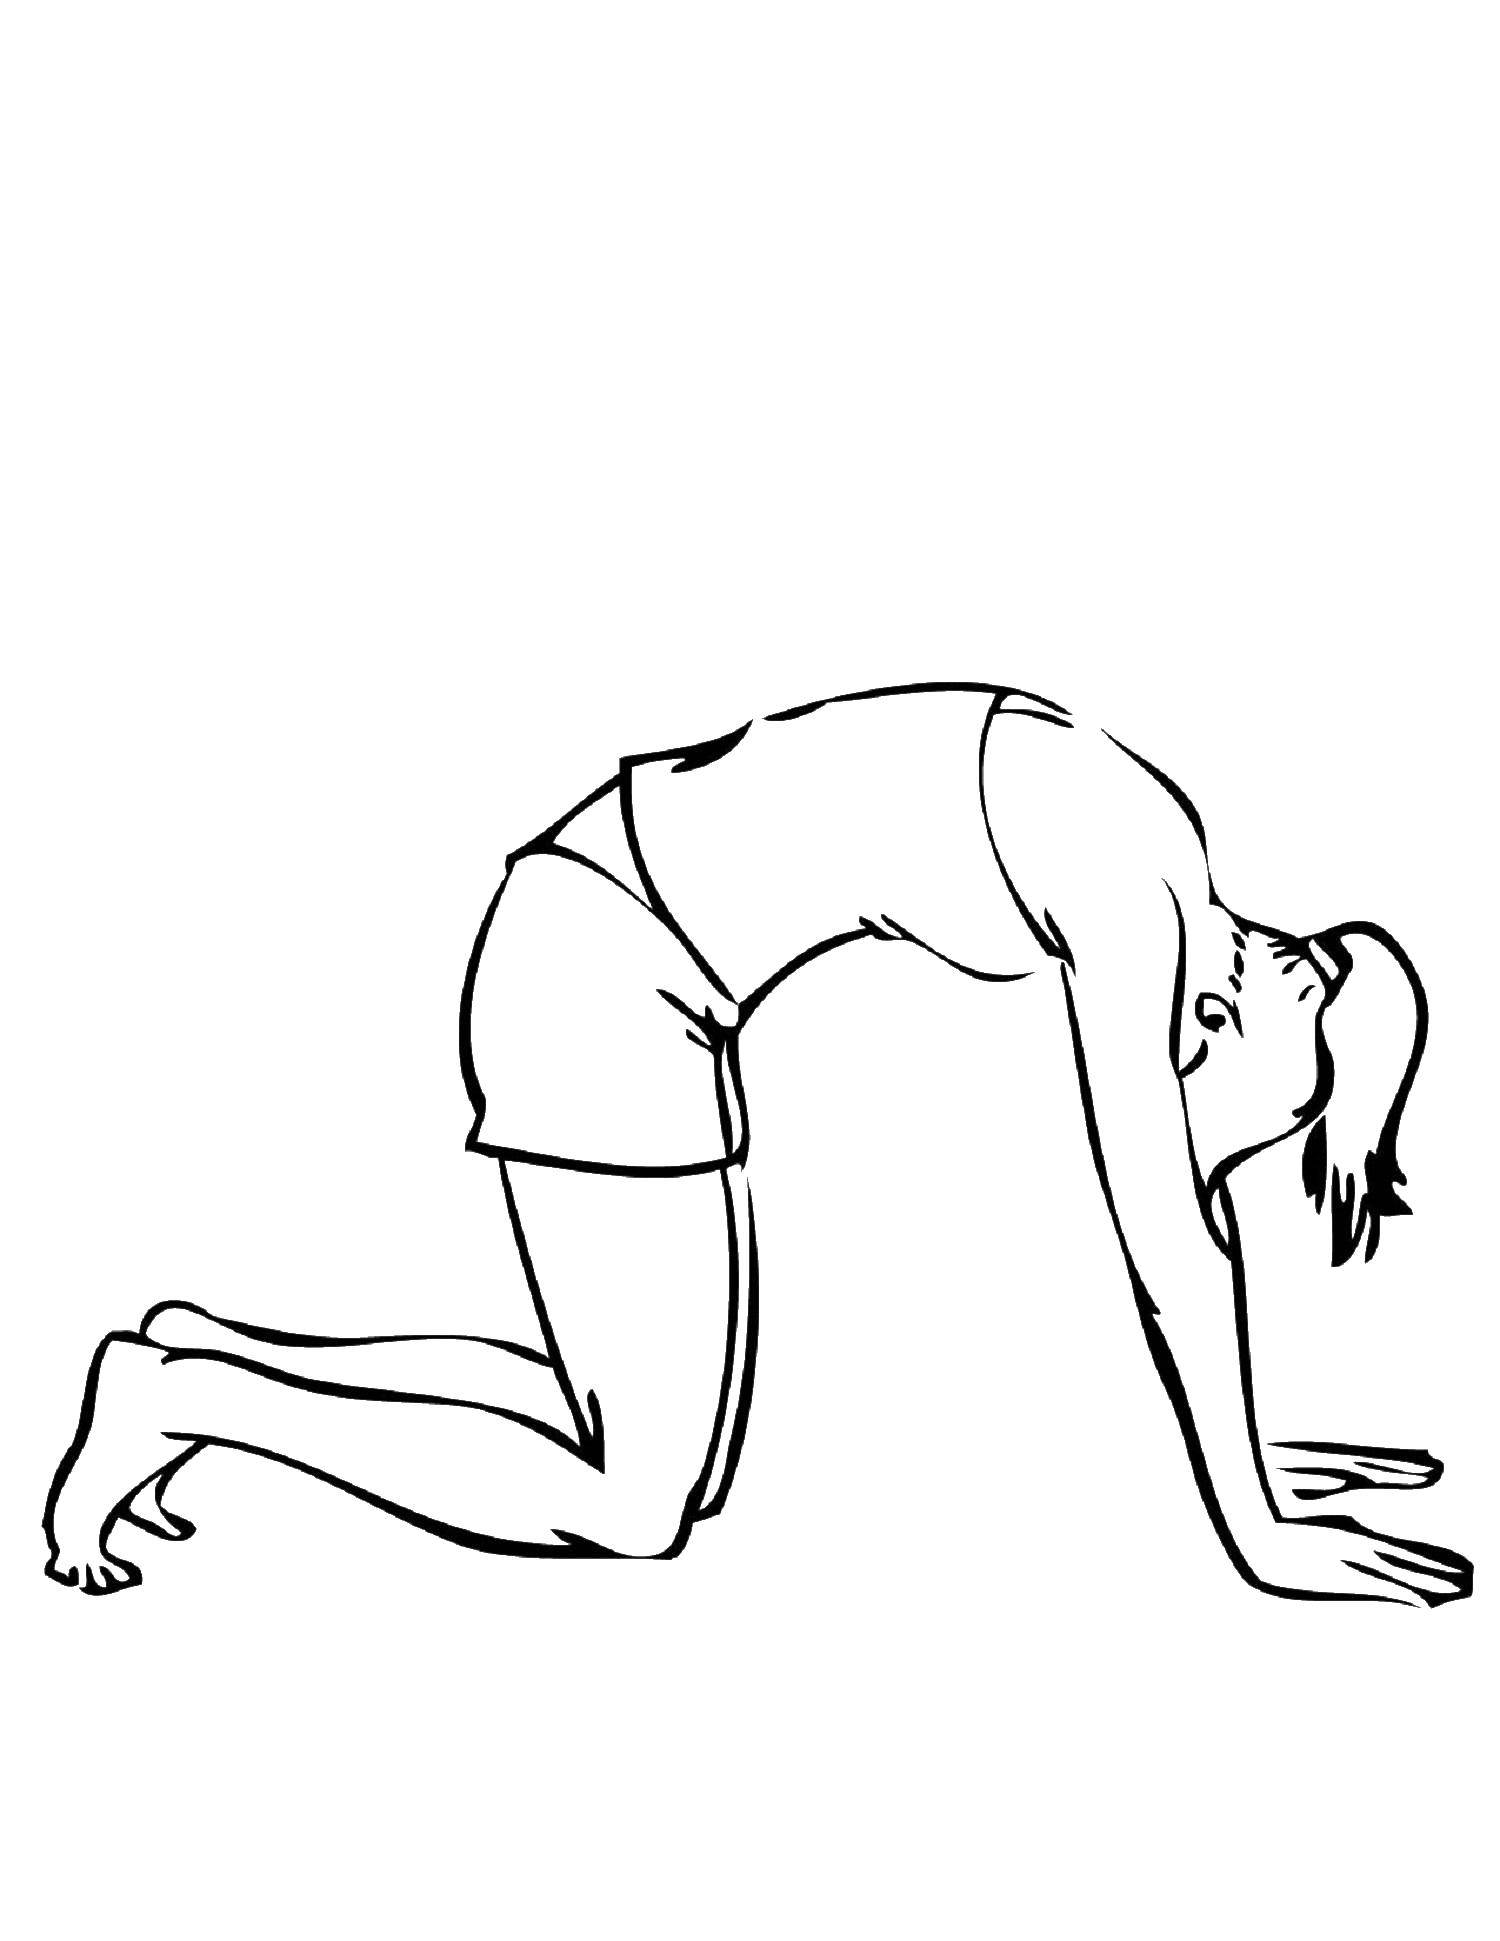 Coloring Girl does yoga deflection of the back. Category yoga. Tags:  yoga.